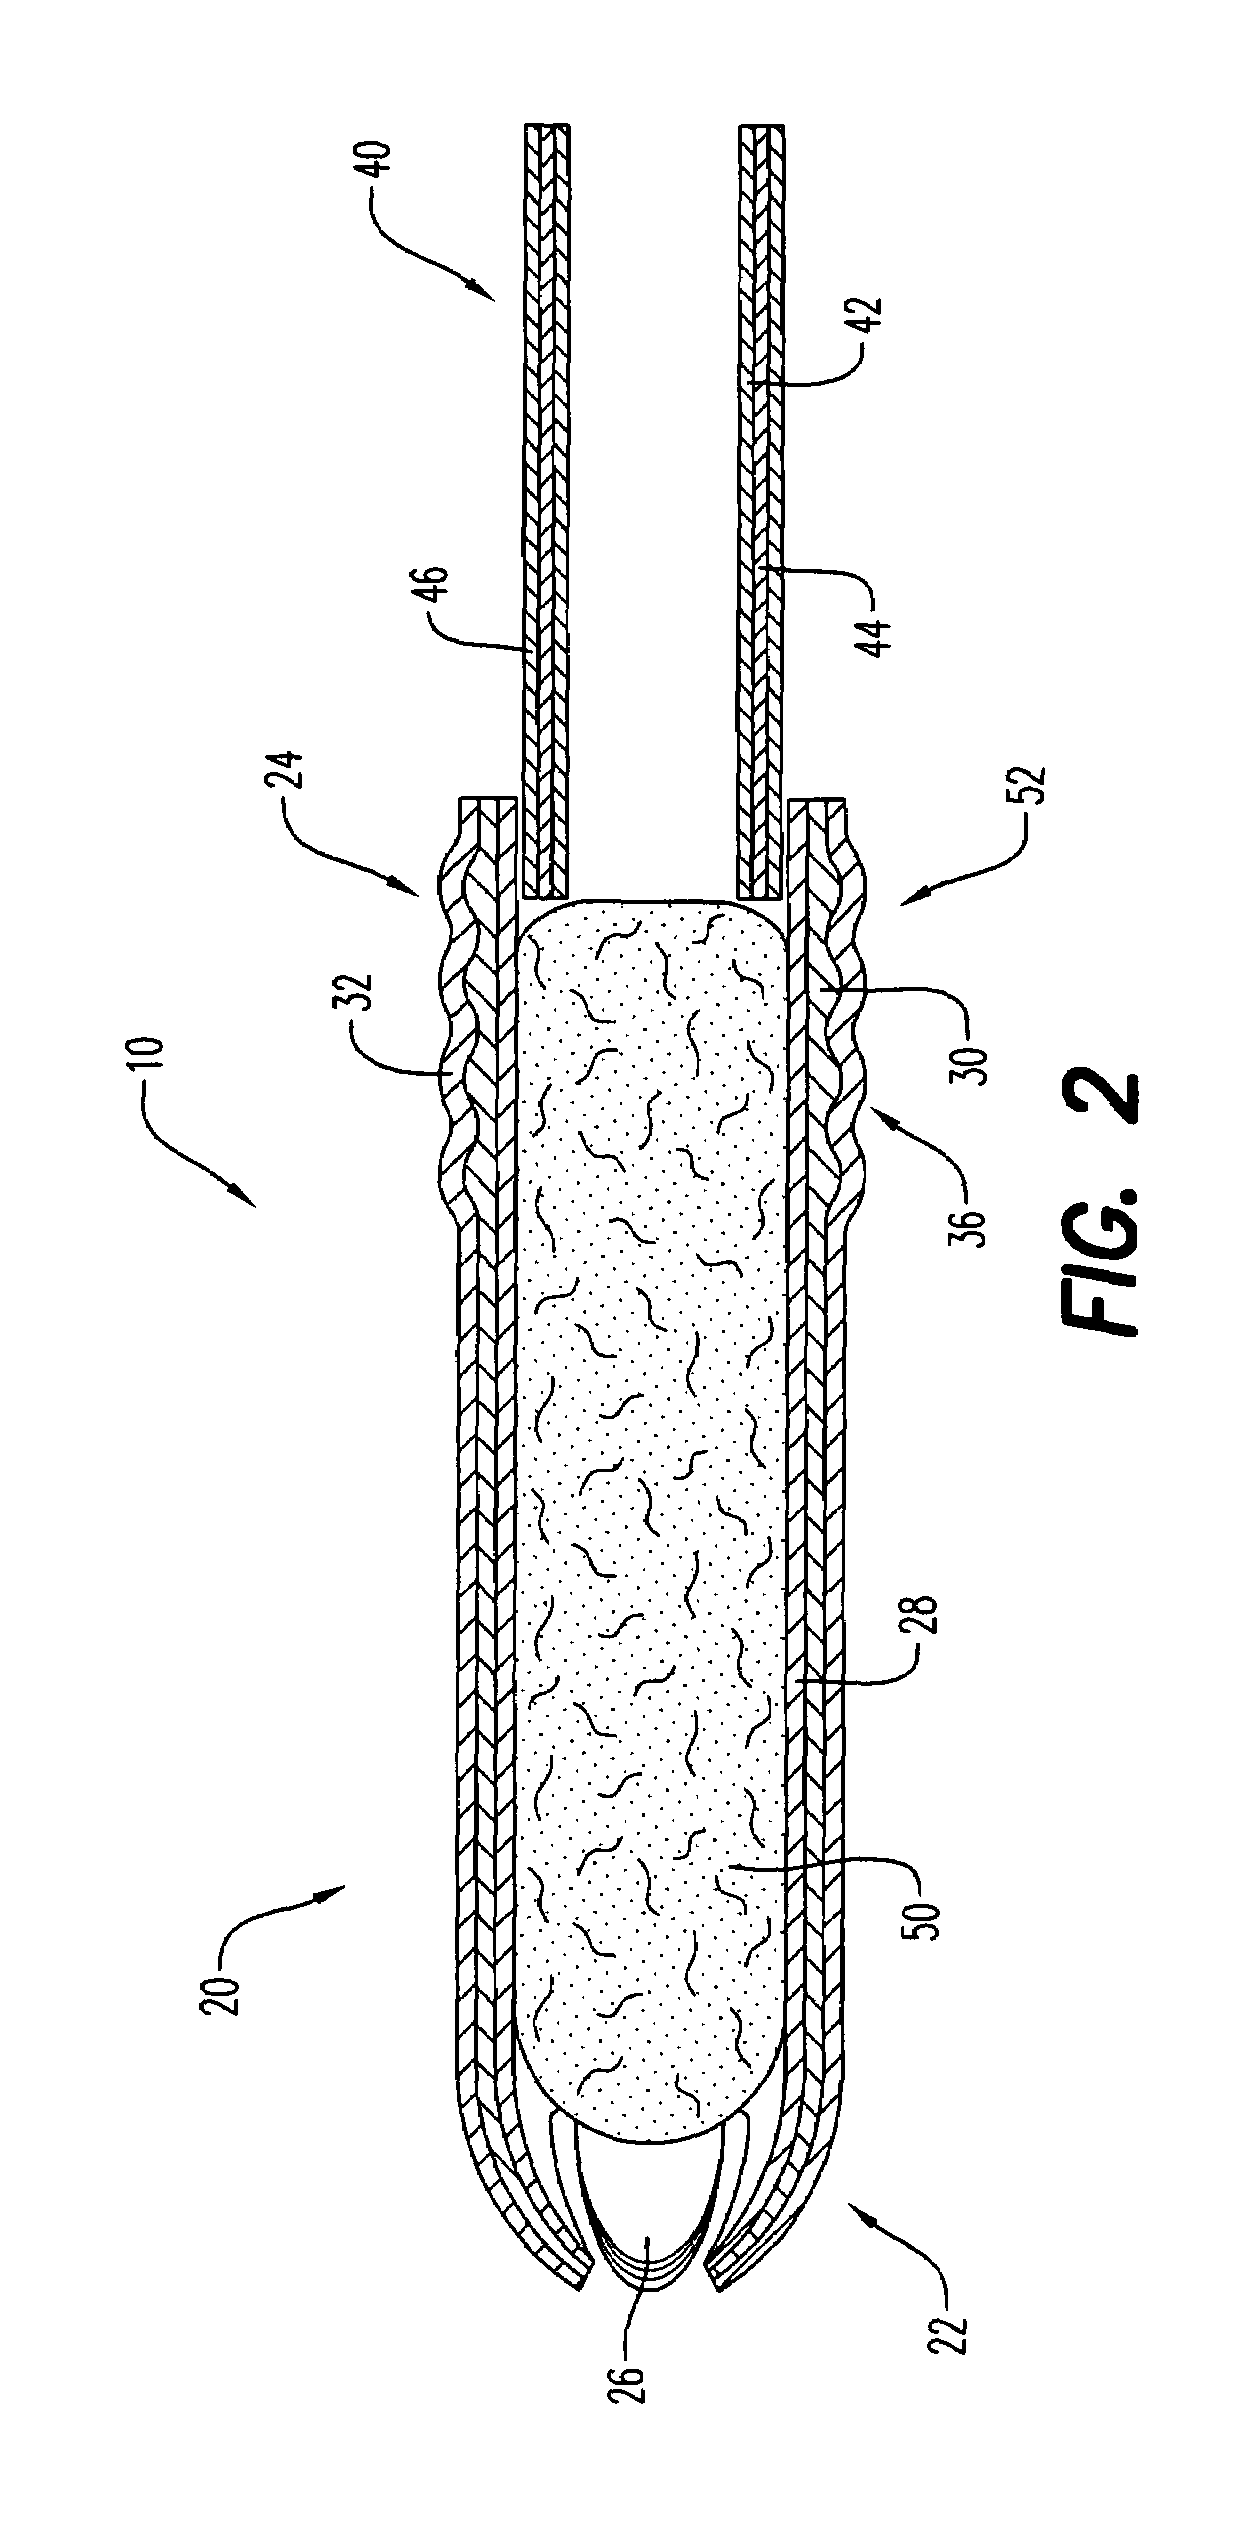 Cardboard tampon applicator with optical enhancing material coated on inner layers